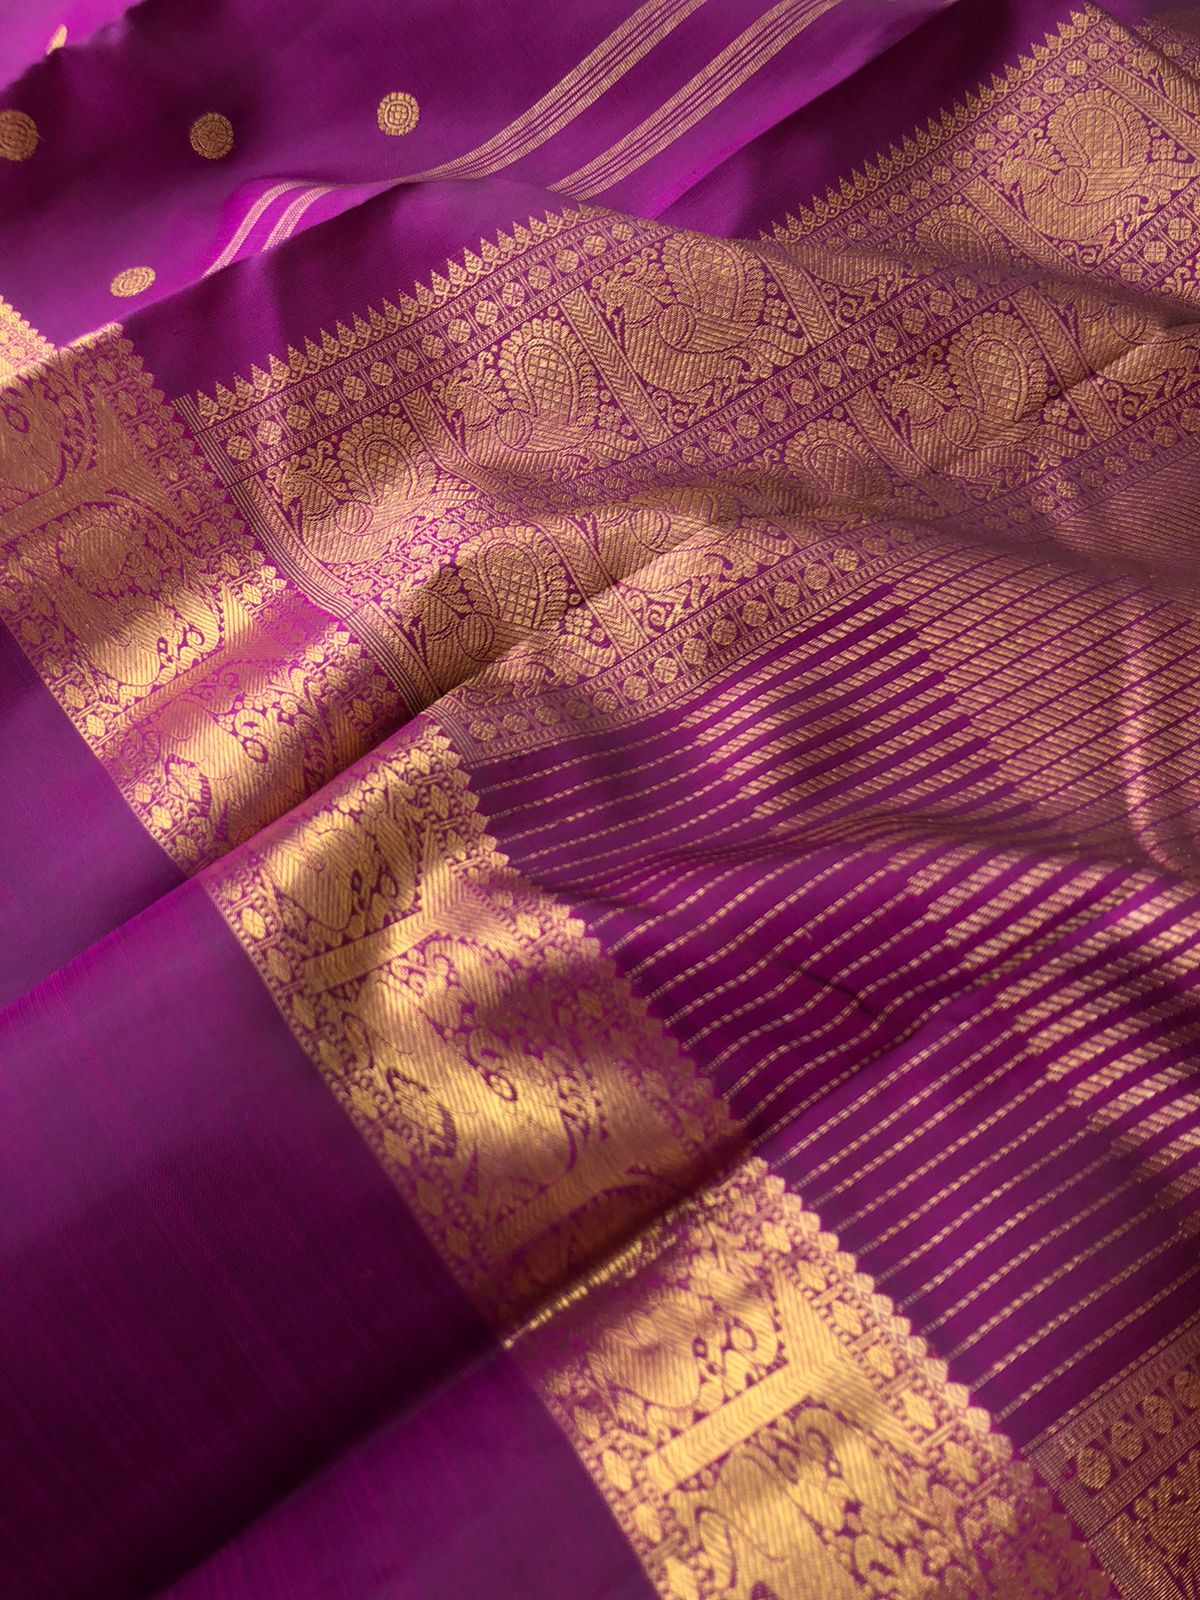 Swarnam - The lineage of Authentic Kanchivaram - the deepest purple and gold a gorgeous Kanchivaram with one side broad and other side short borders